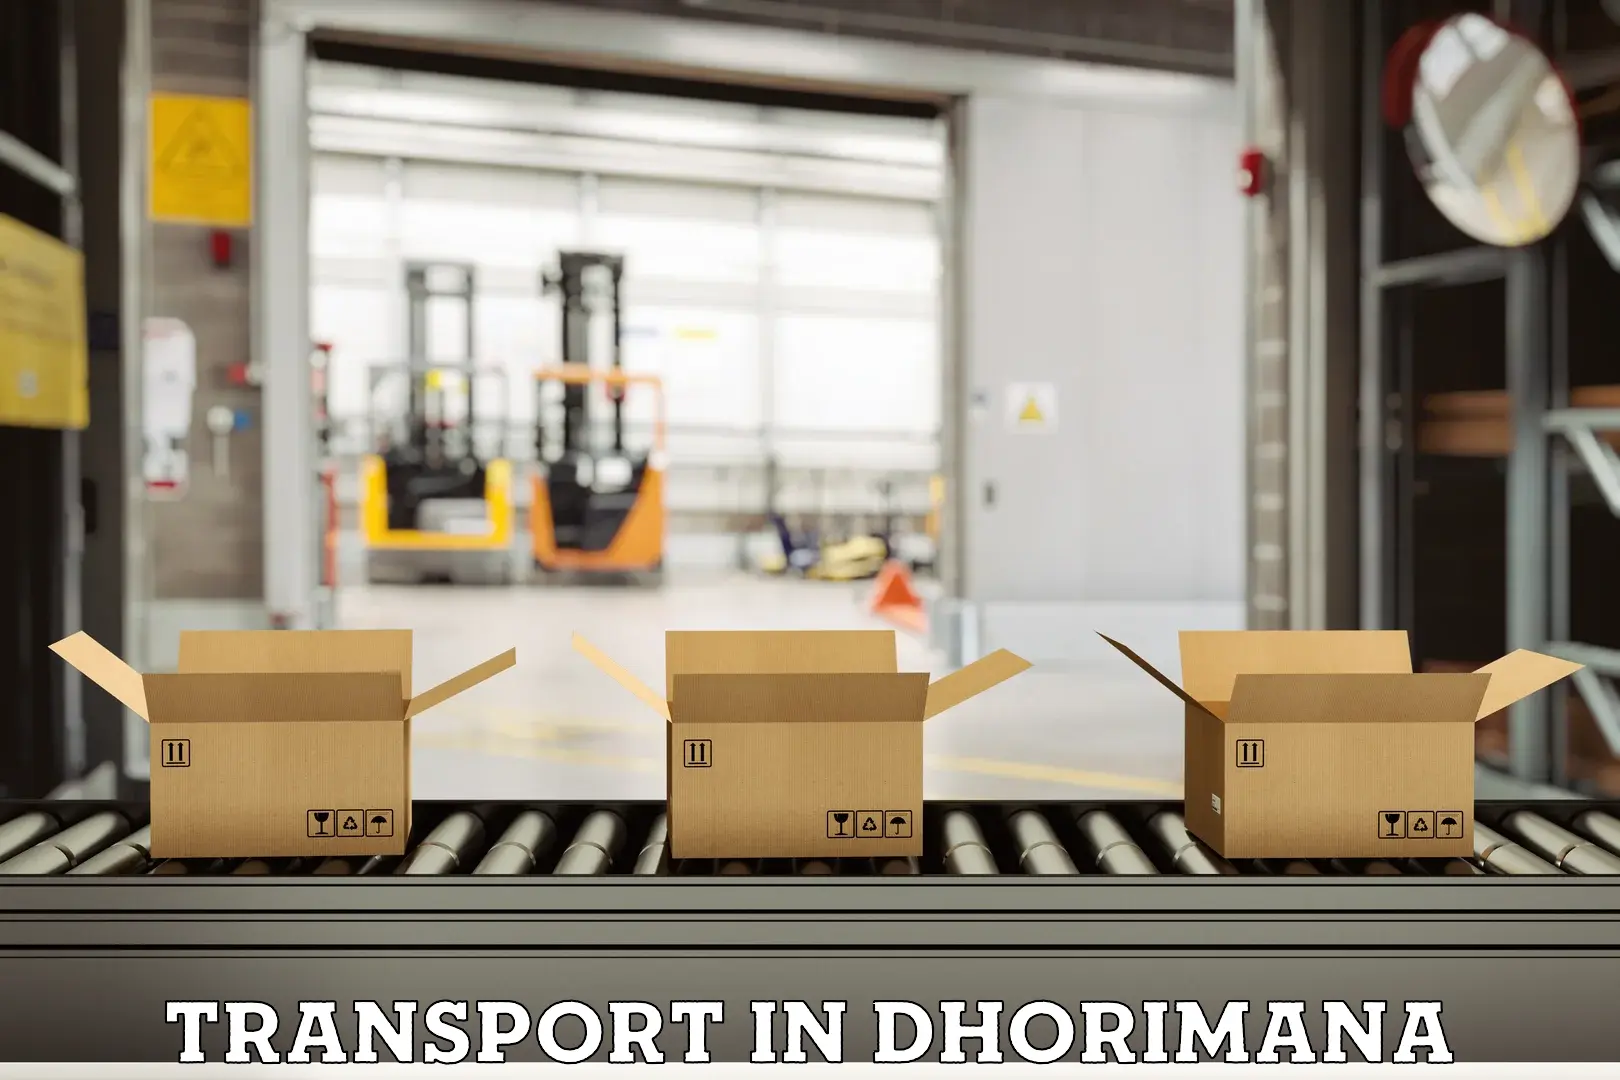 Express transport services in Dhorimana